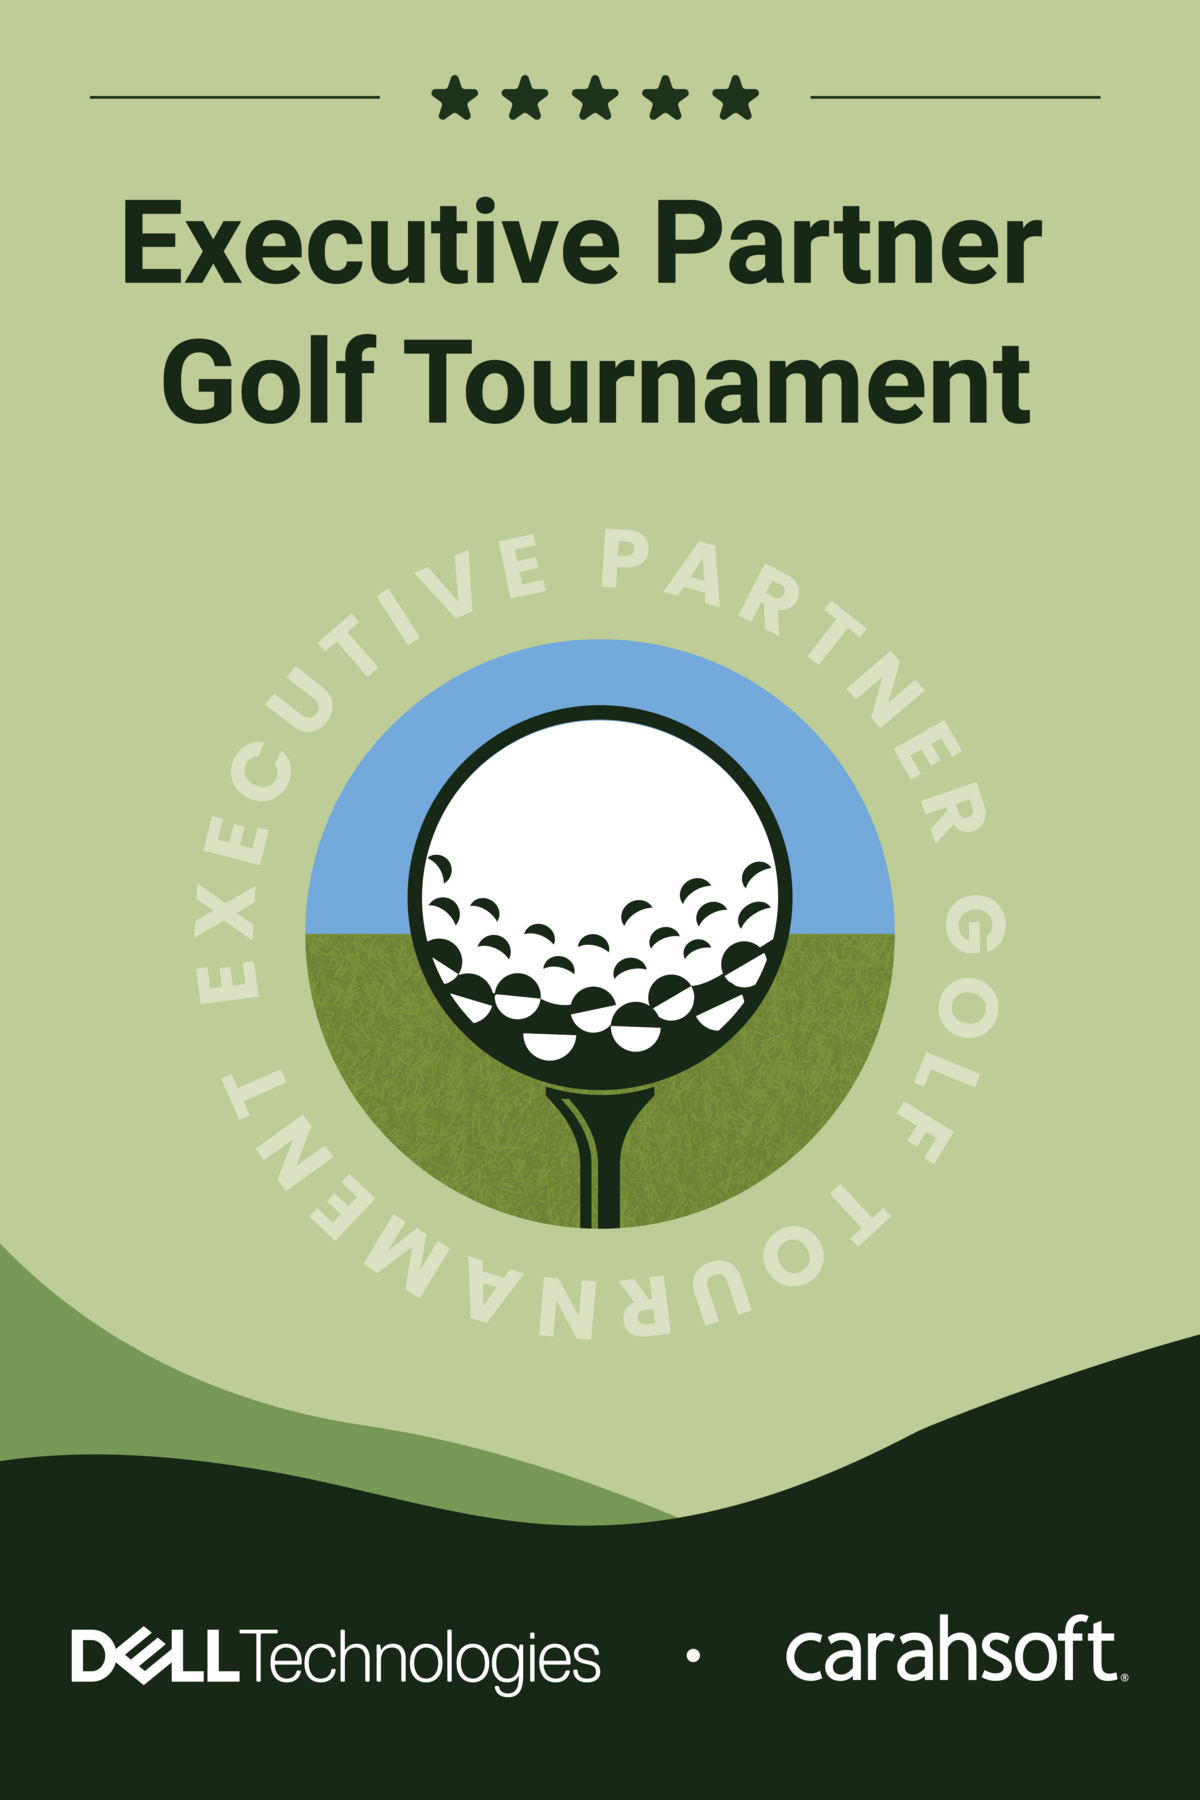 Dell Executive Partner Golf Tournament_Event Signage (Outlined)